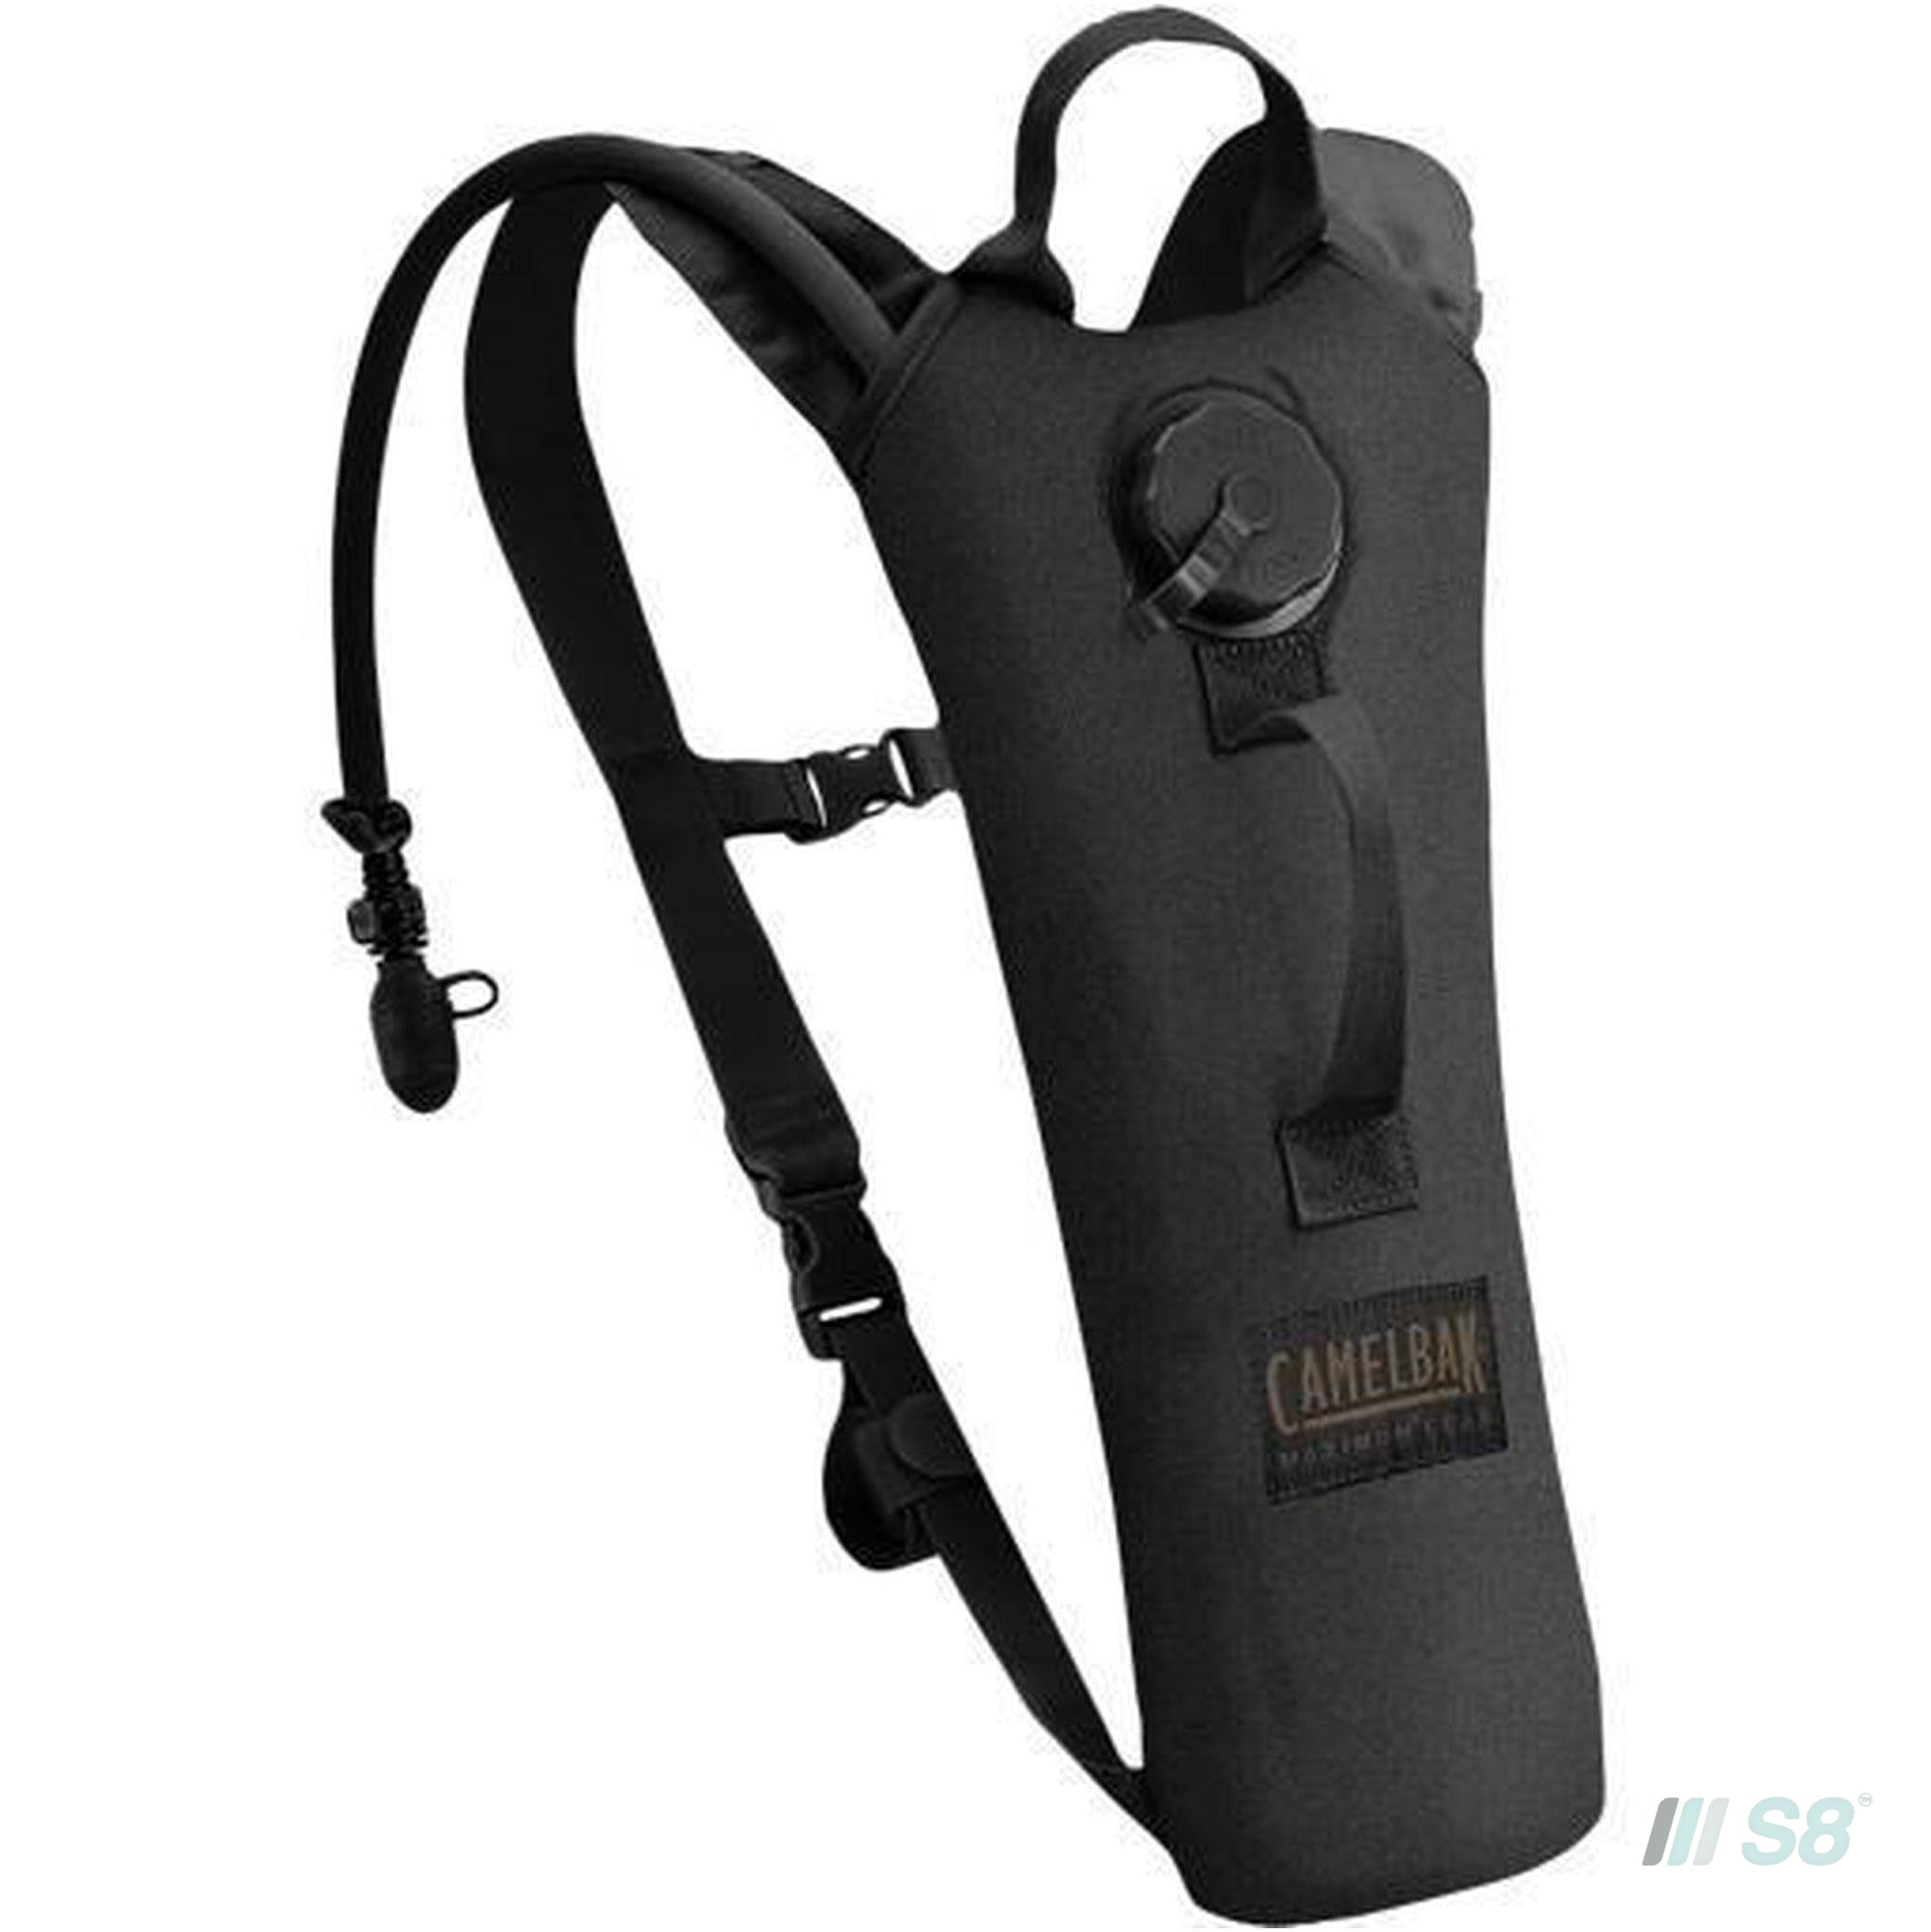 Camelbak Thermobak 2L Military Long Neck Hydration Pack - Black-Camelbak-S8 Products Group